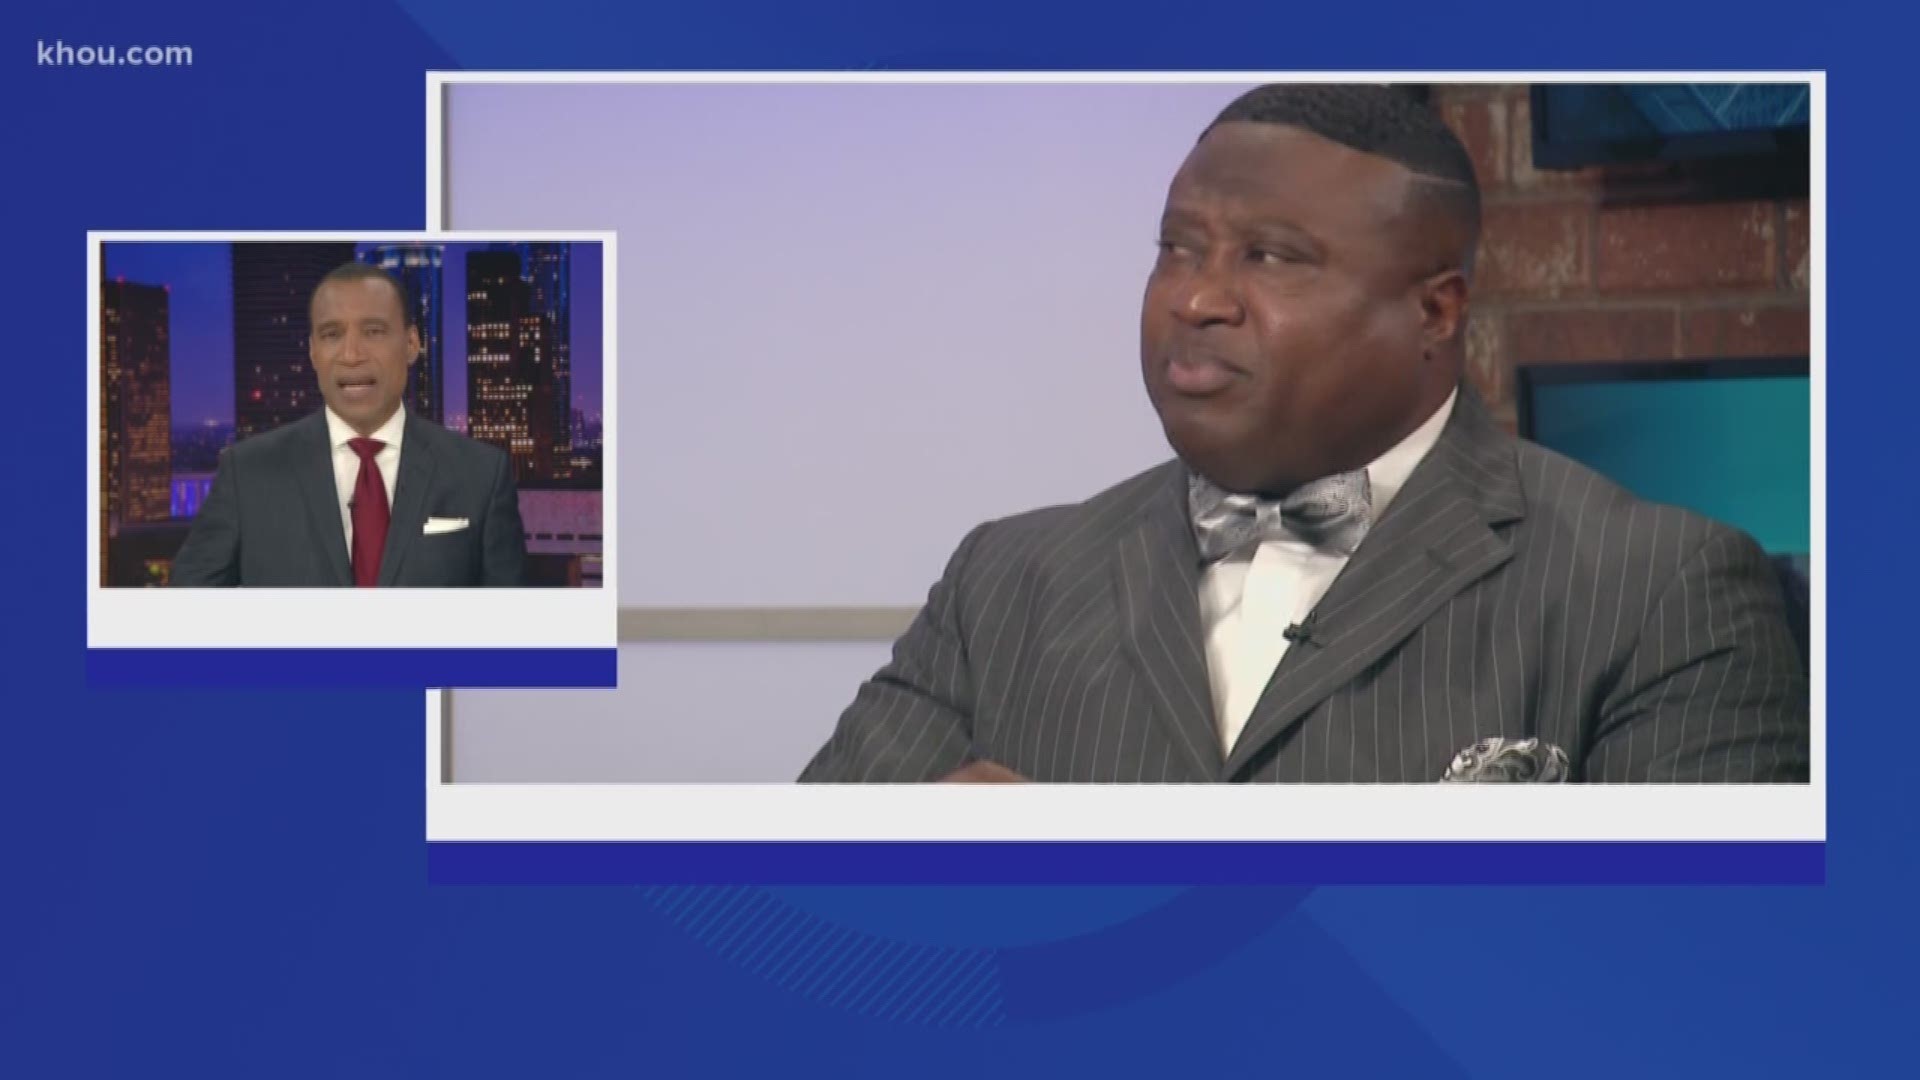 Community activist Quanell X told KHOU 11 he is no longer a spokesperson for Brittany Bowens.